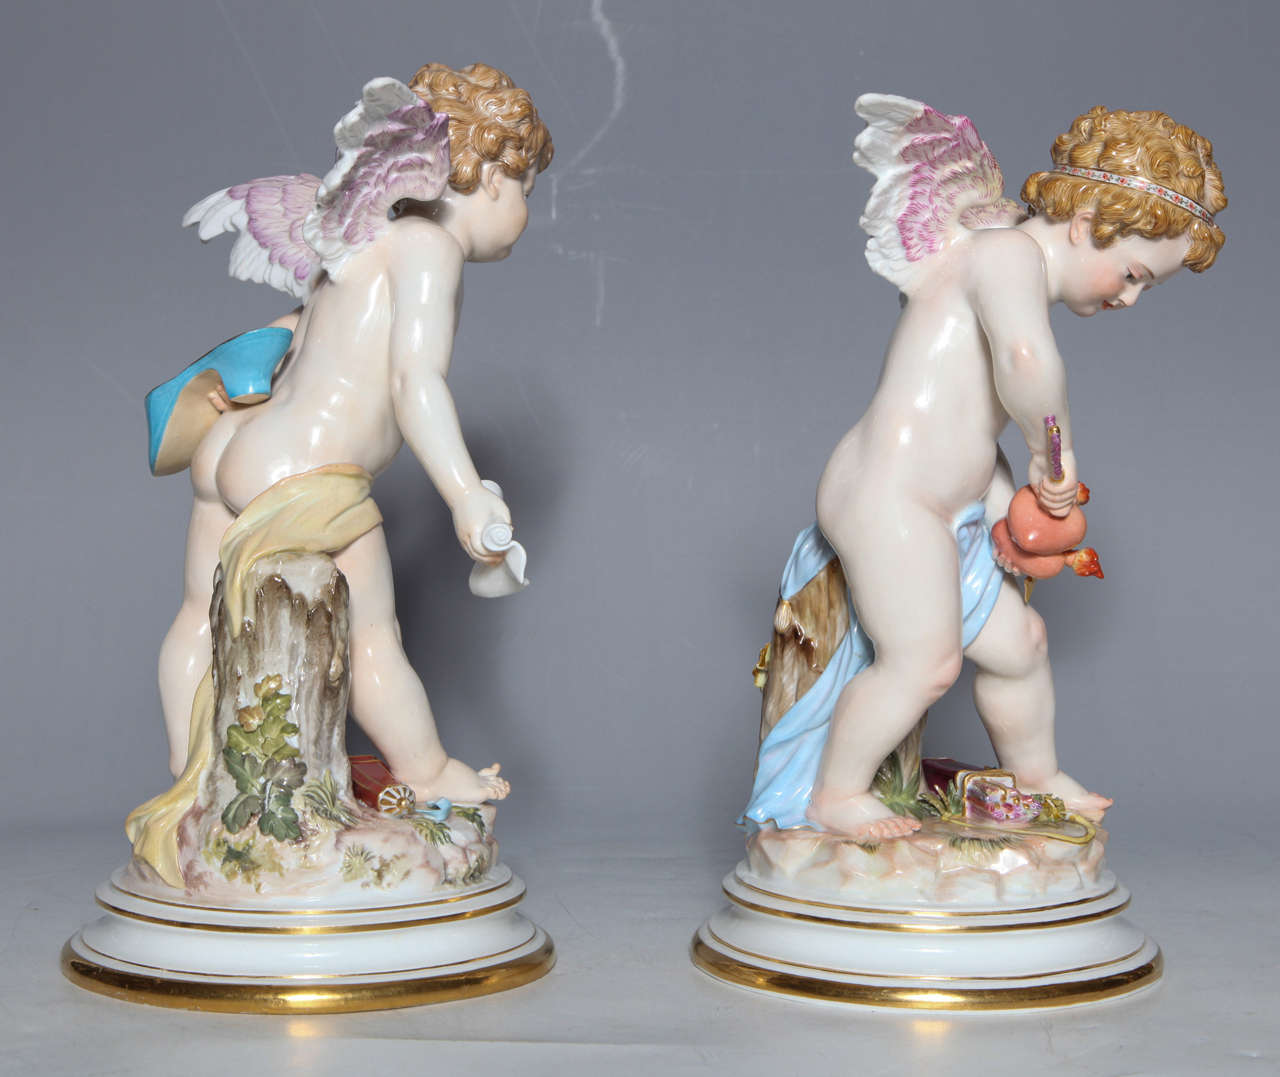 Rococo Revival Meissen Porcelain Large Devisenkinder Cupid Figurines with Markings 1860s For Sale